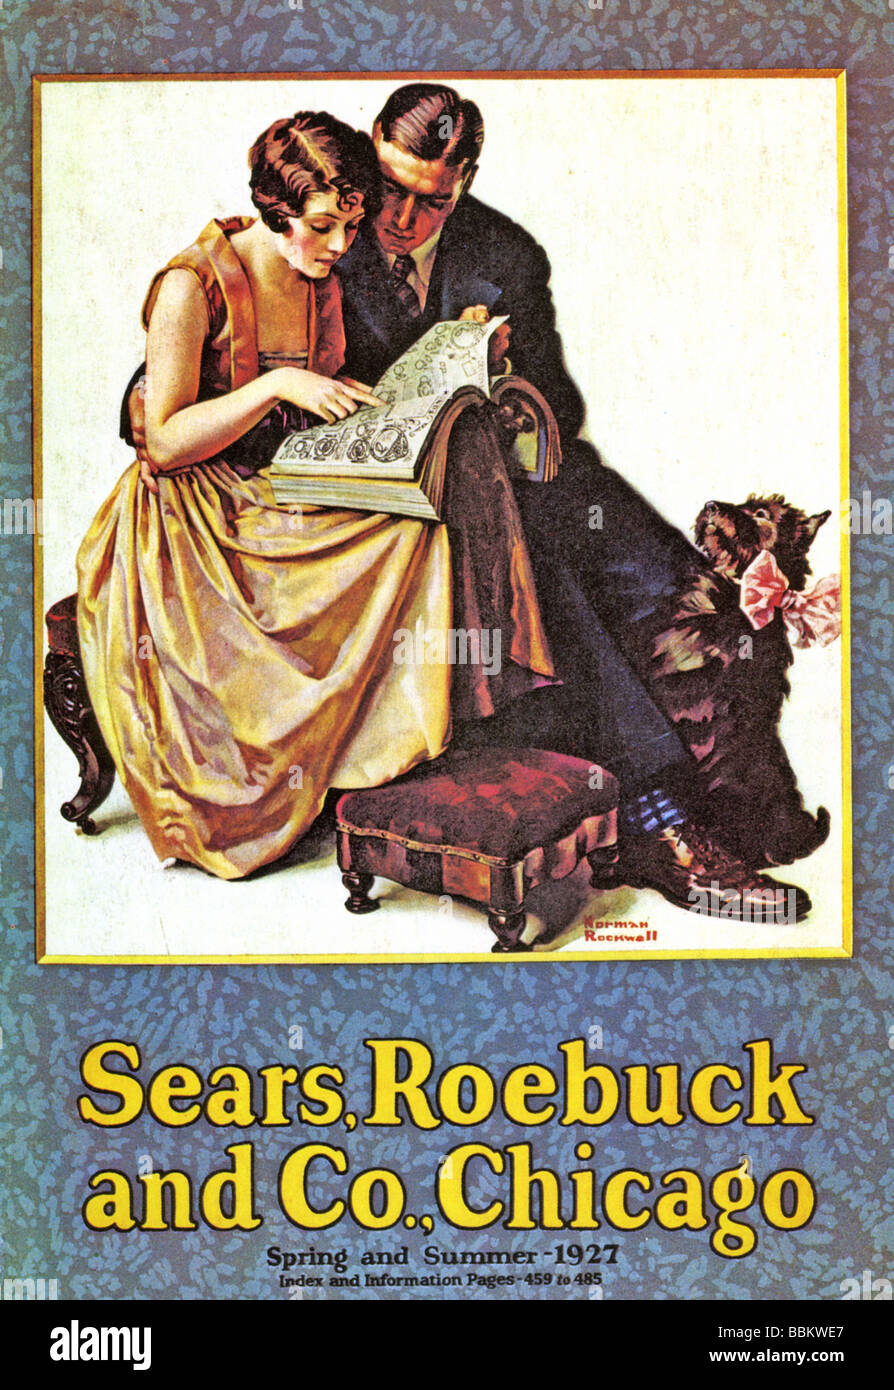 SEARS ROEBUCK catalogue for Spring and Summer 1927 ran to nearly 1000 pages Stock Photo